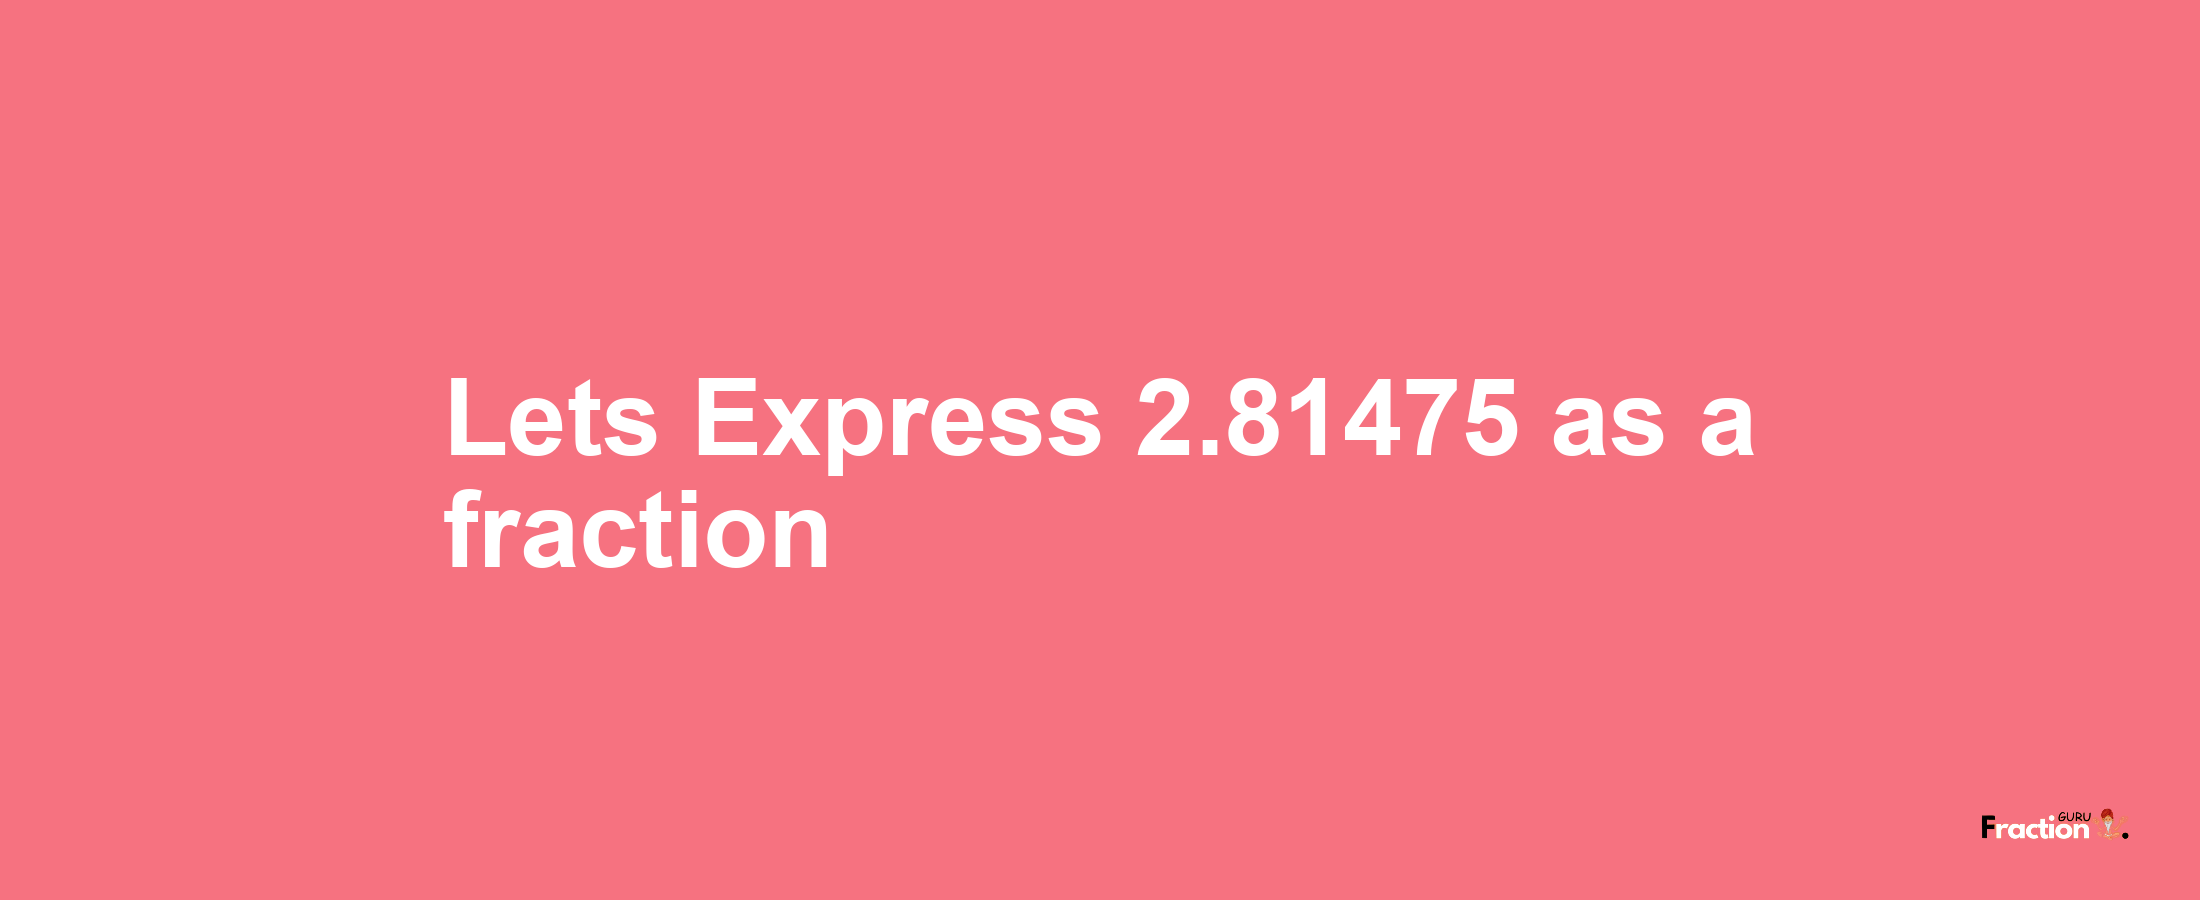 Lets Express 2.81475 as afraction